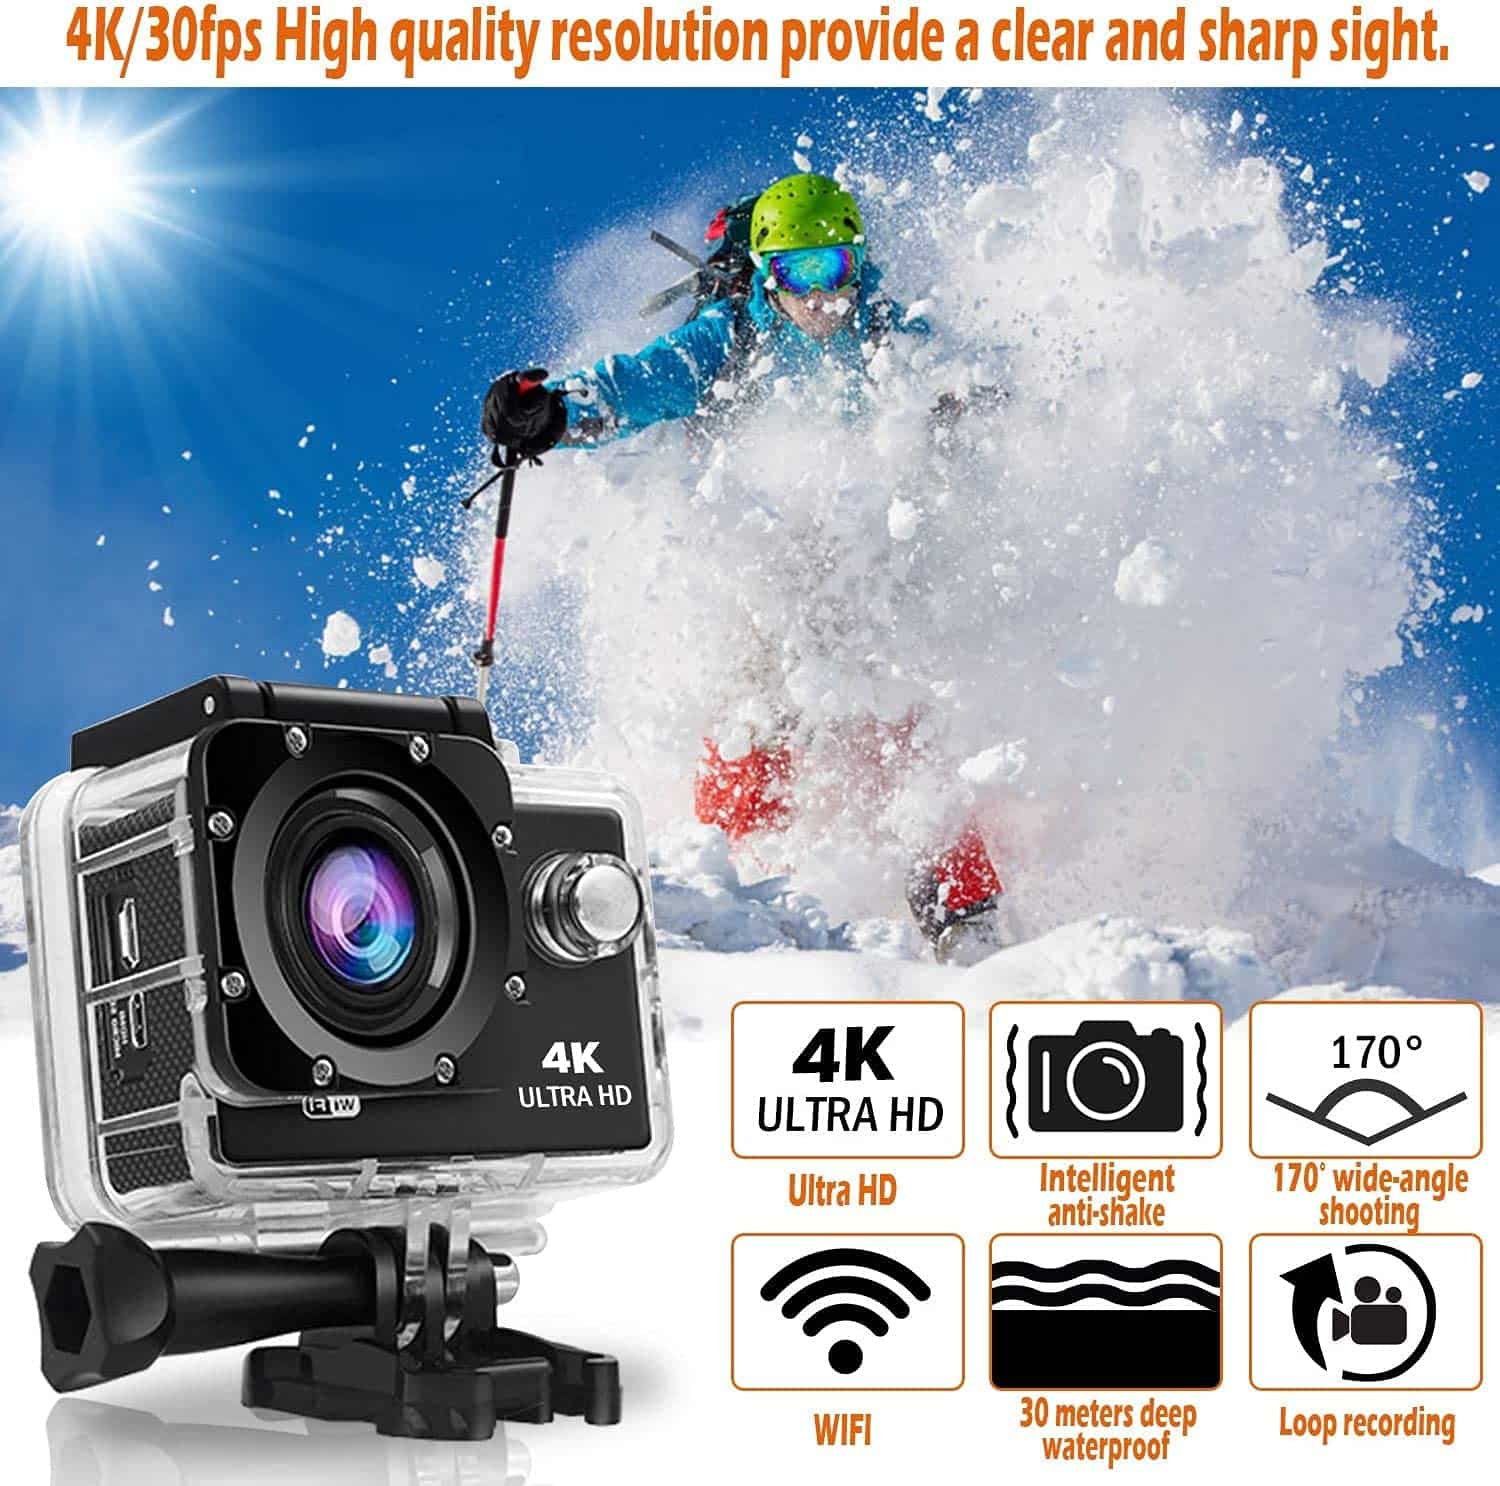 Napasa Action Camera 4K Ultra HD WiFi Sports Camera Underwater Wide Angle 170° with Remote Control and Helmet Accessories Kit 